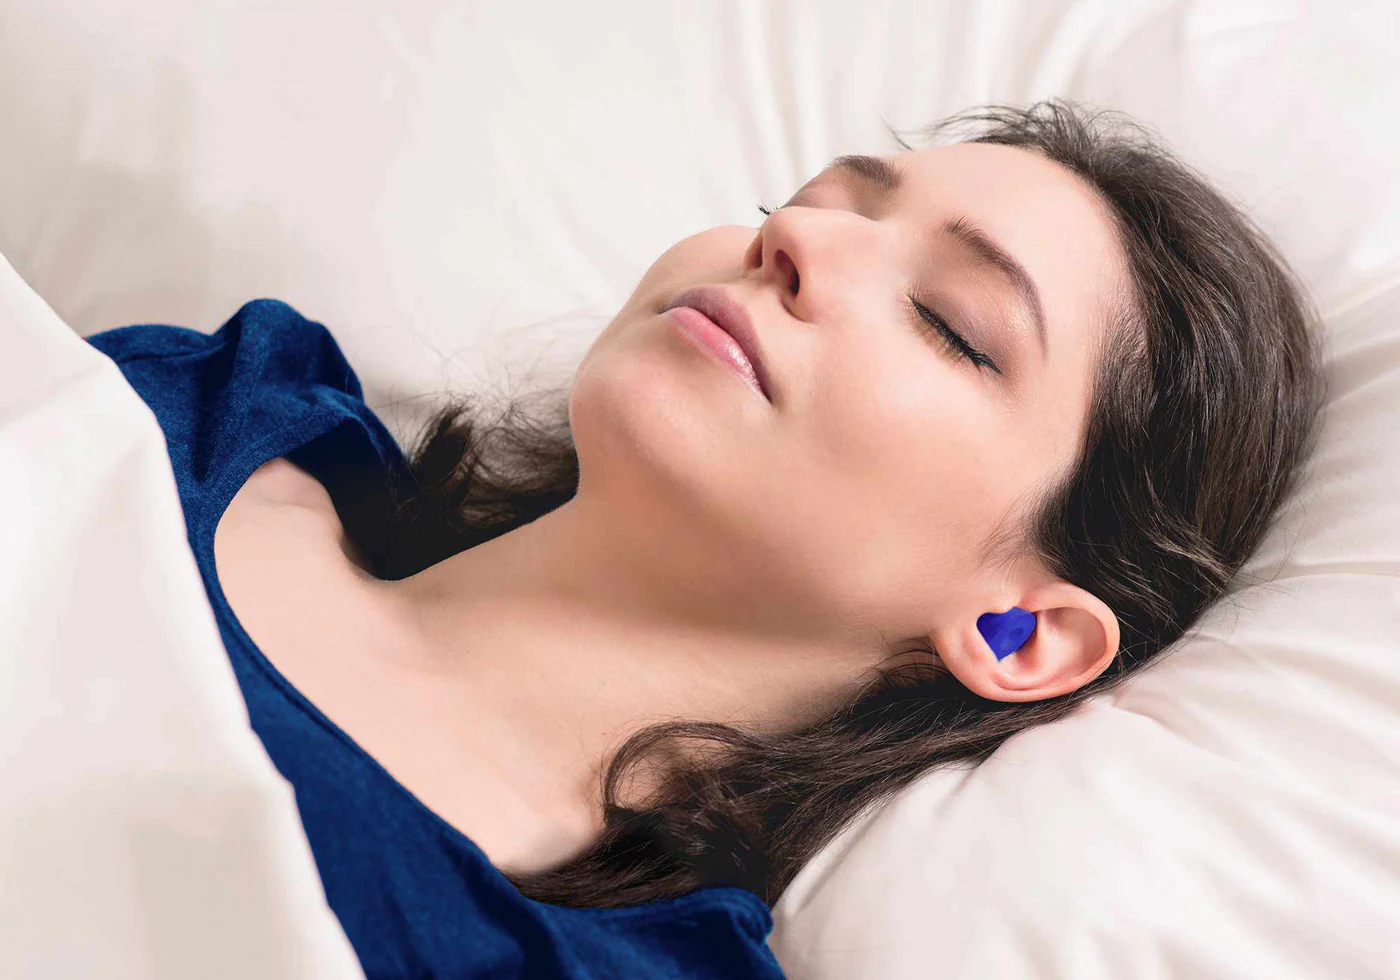 A girl napping in bed wearing a blue earplug to keep things quiet.